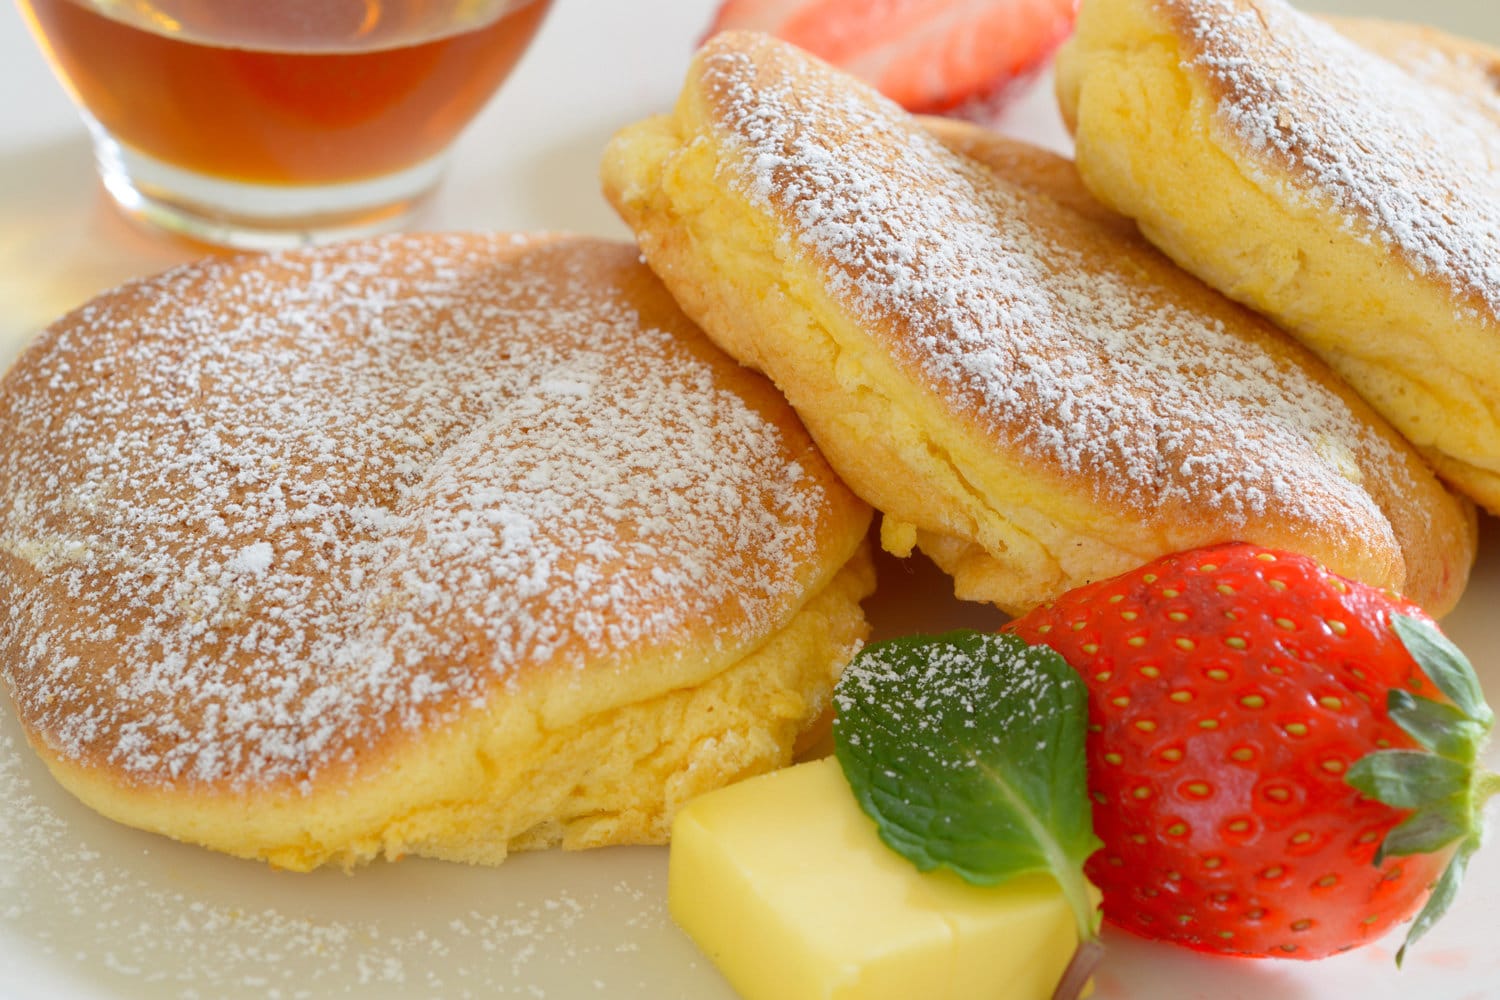 Japanese Souffle Pancake with butter and strawberries